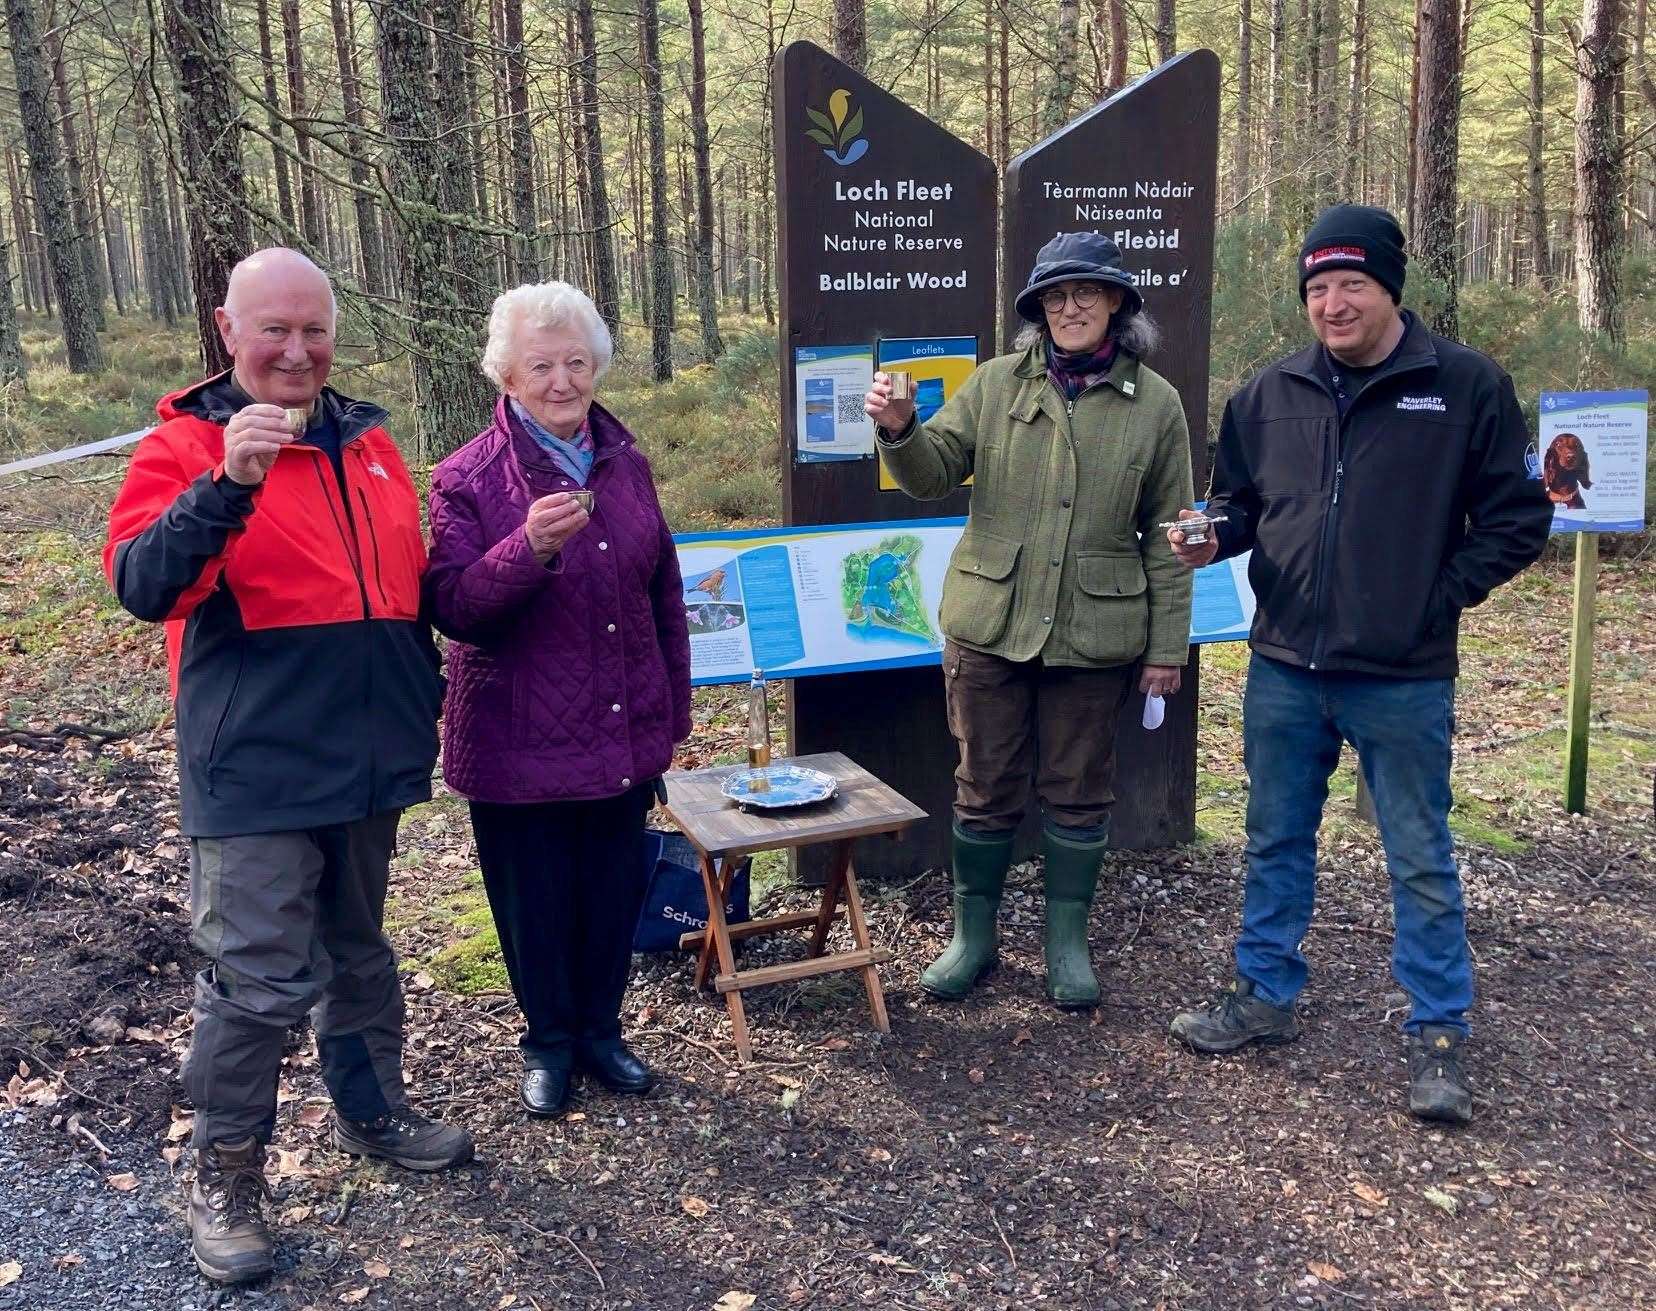 Raising their glasses in a toast to the completion of the path project are, from left, Iain Miller, Sally Gordon, Henrietta Marriott and Richard Gordon of Waverley Engineering.